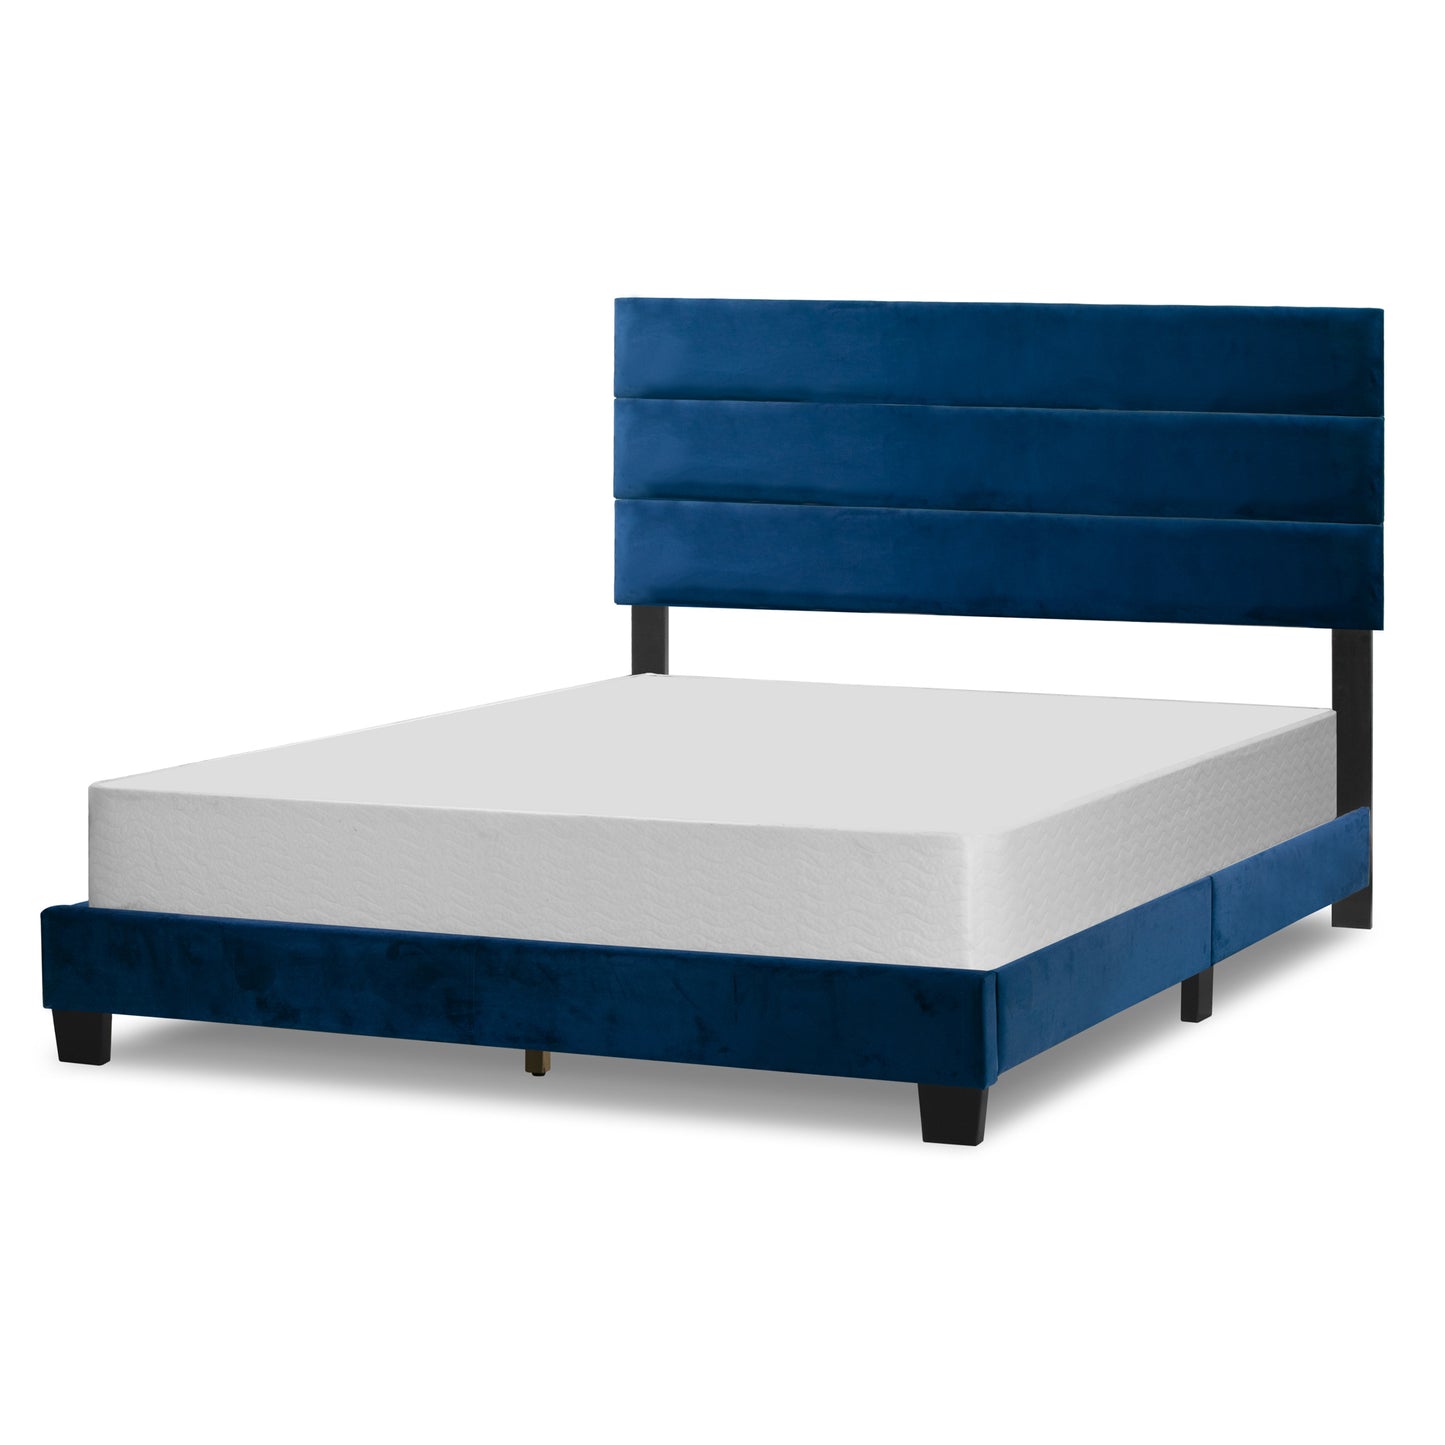 Aris Navy Blue Velvet Queen Bed with Line Stitching Tufting